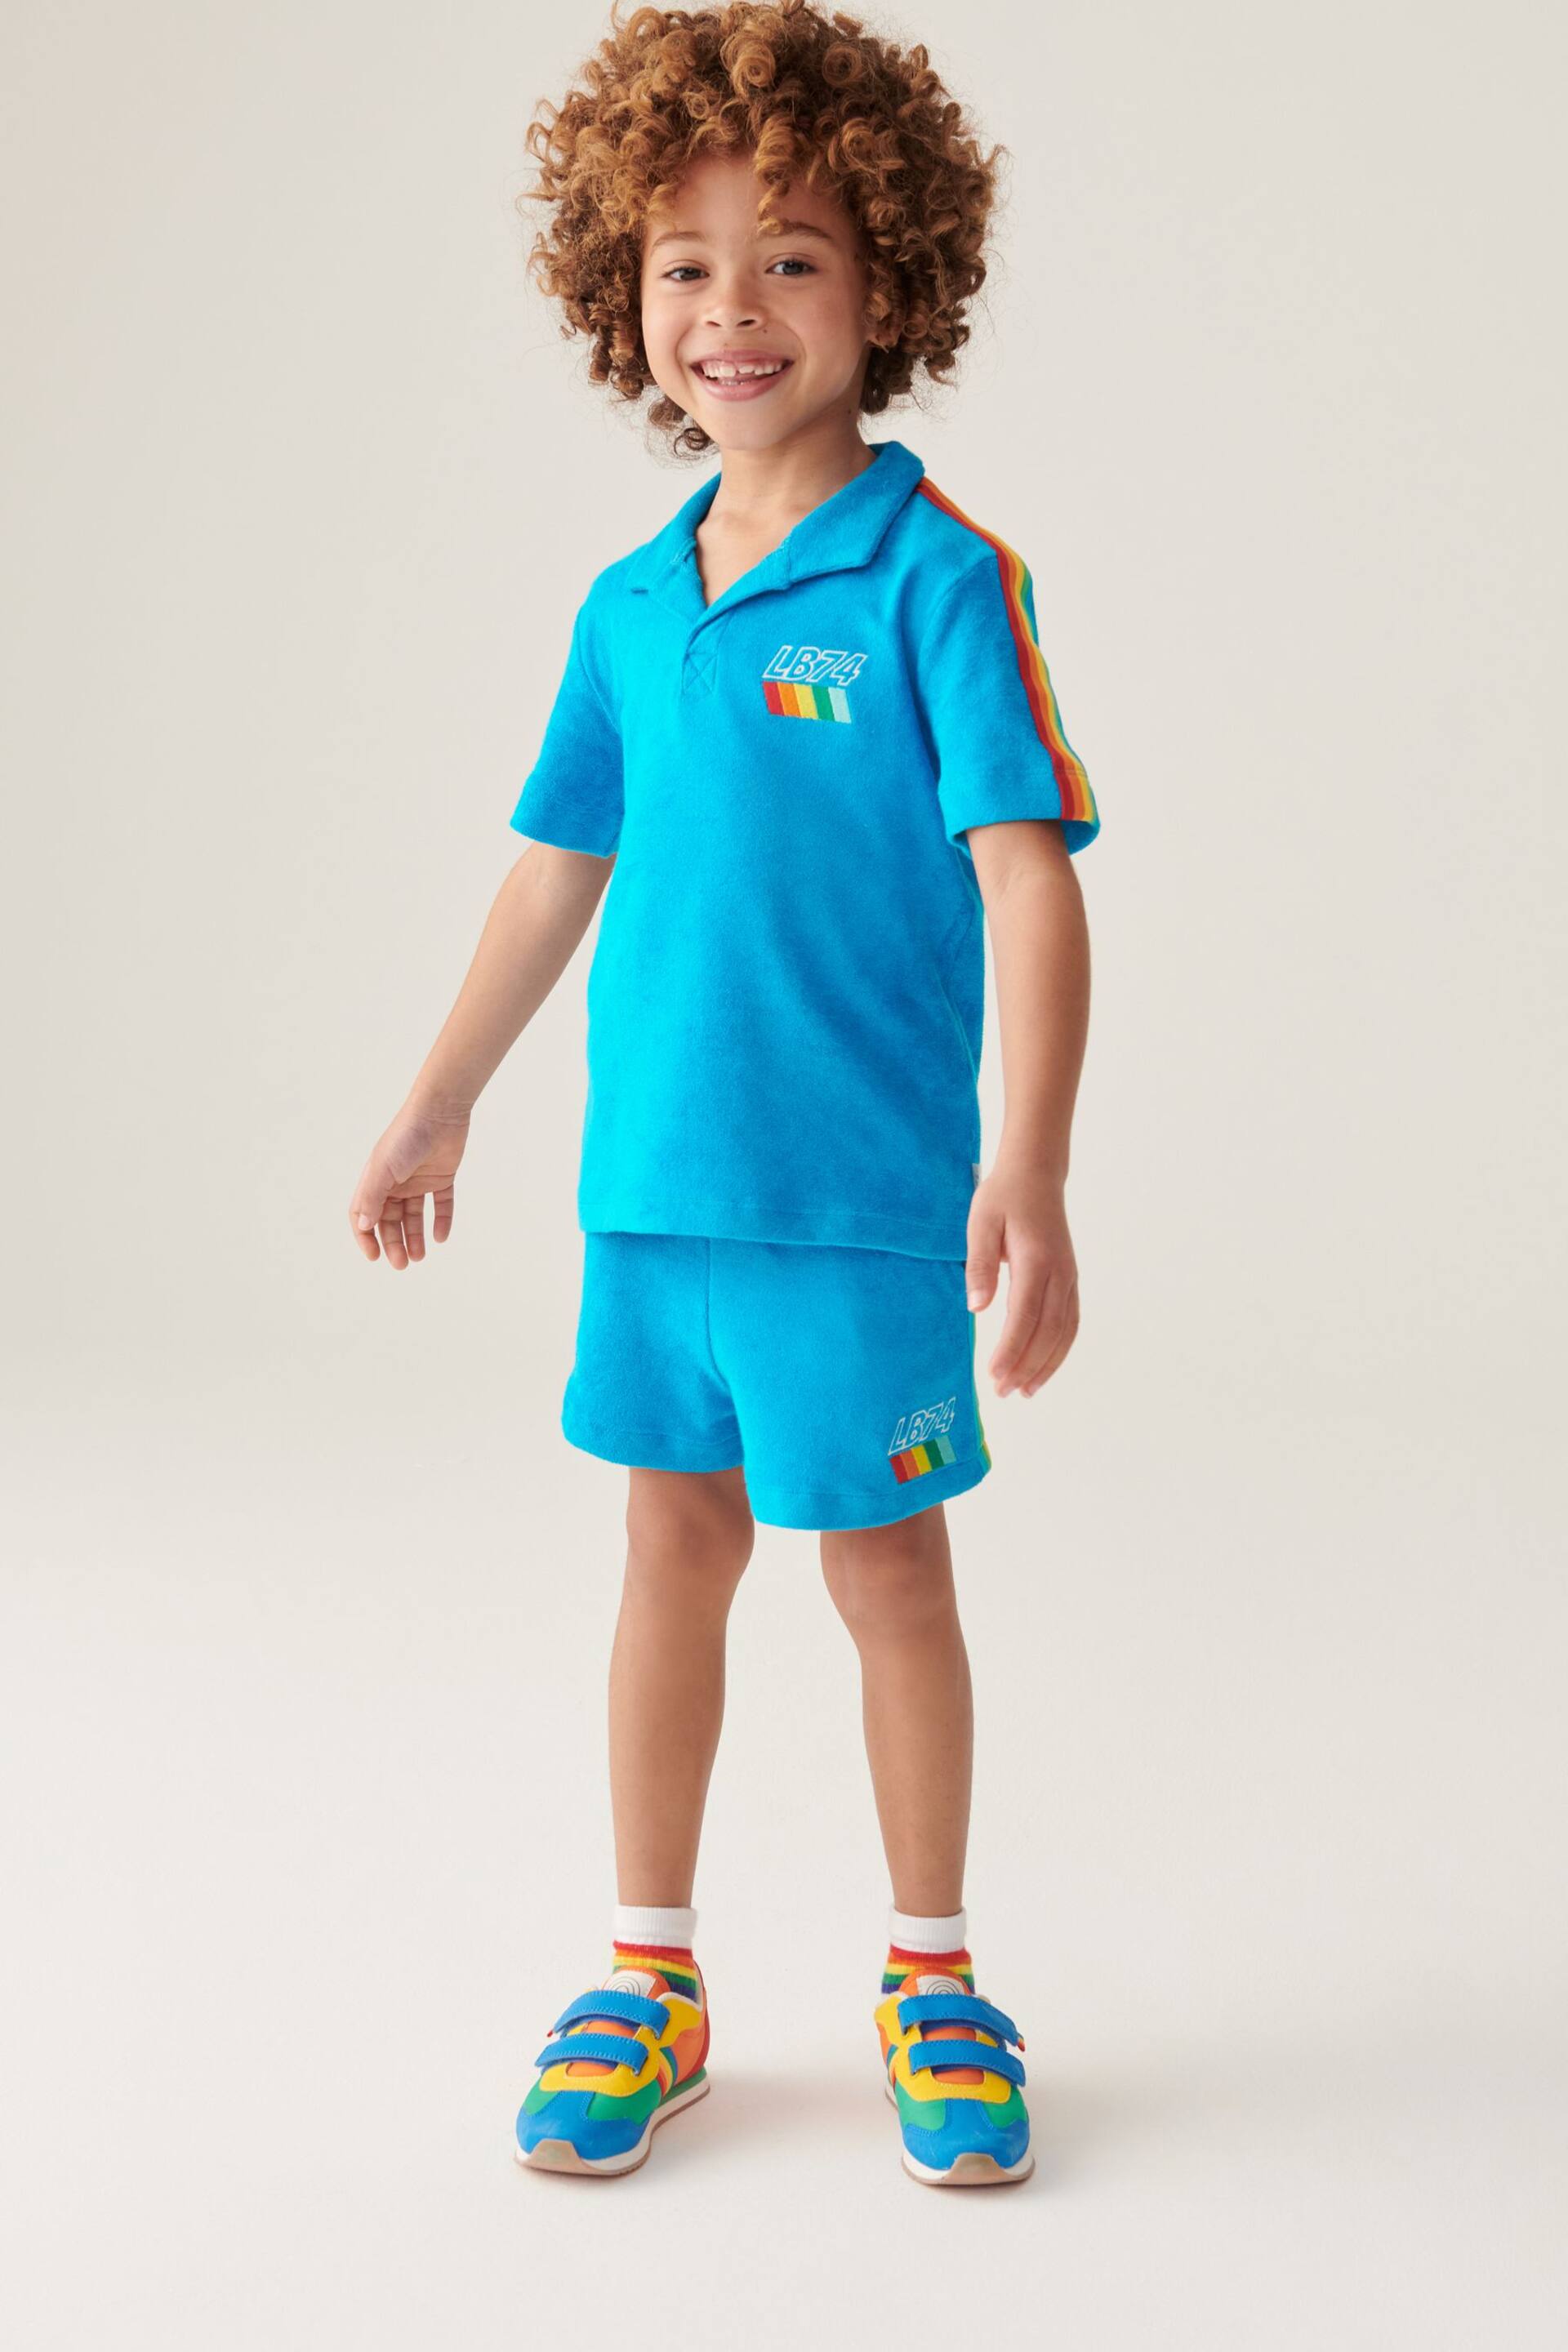 Little Bird by Jools Oliver Blue Towelling Polo Top and Shorts Set - Image 1 of 7